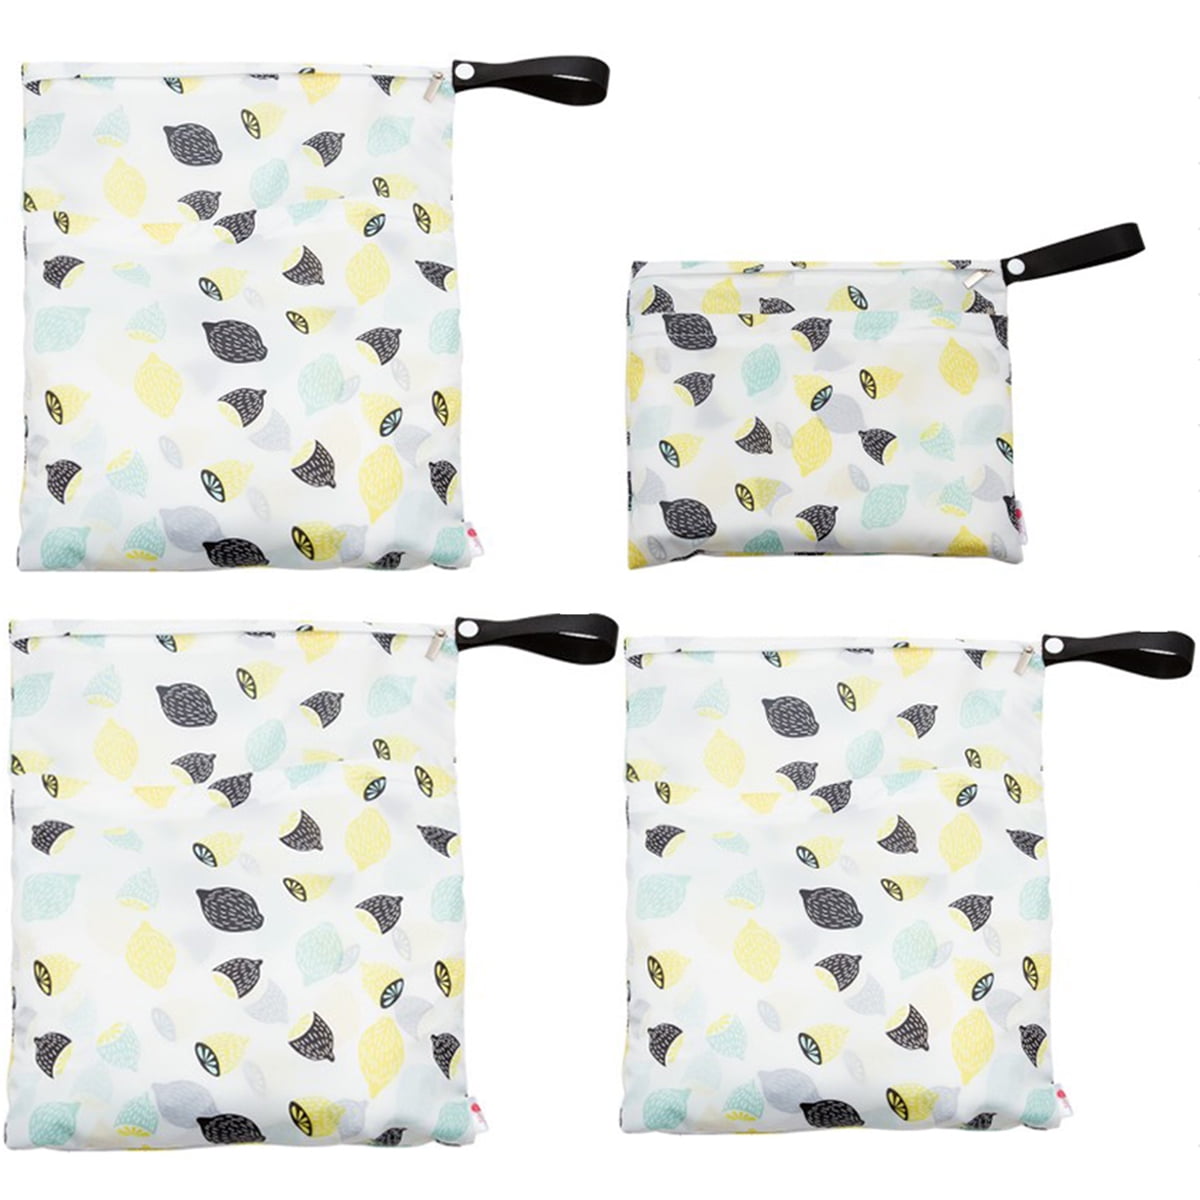 Washable Zipper Travel Waterproof Storage Pouch Dry Diaper Wet Bag Tote Nappy 